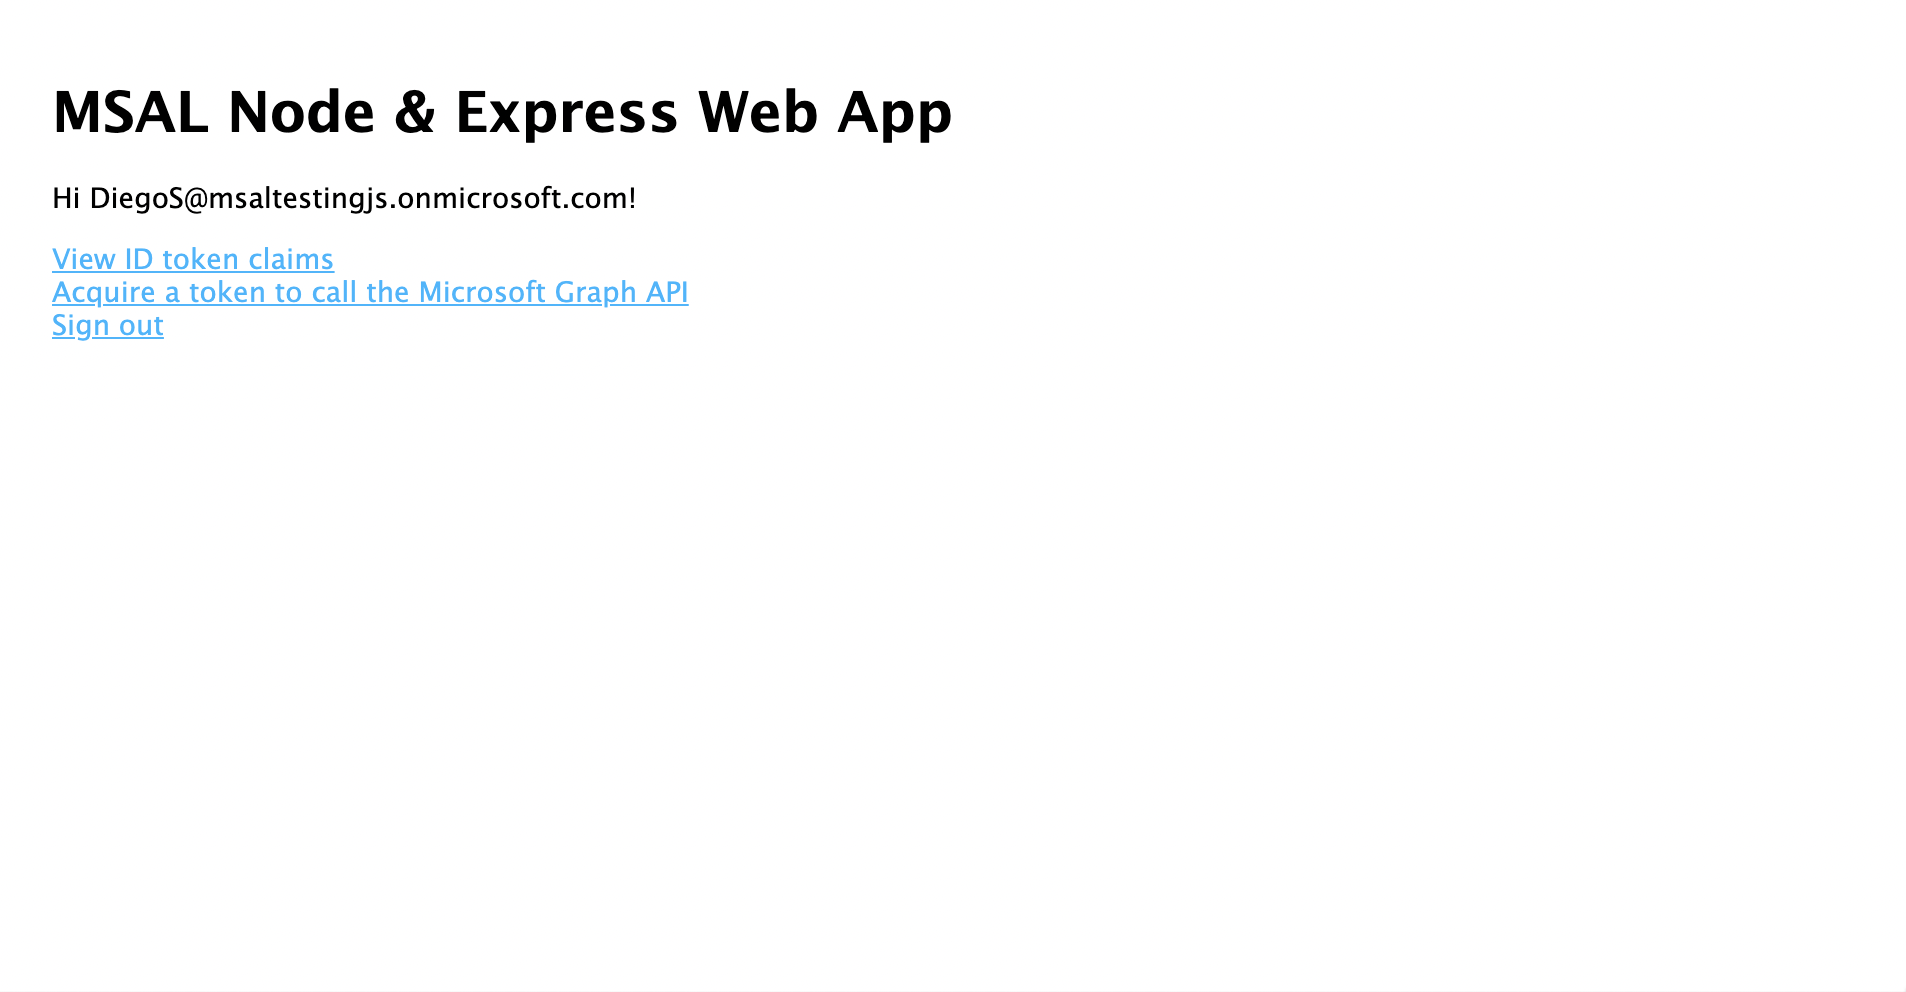 Web app welcome page after sign-in displaying